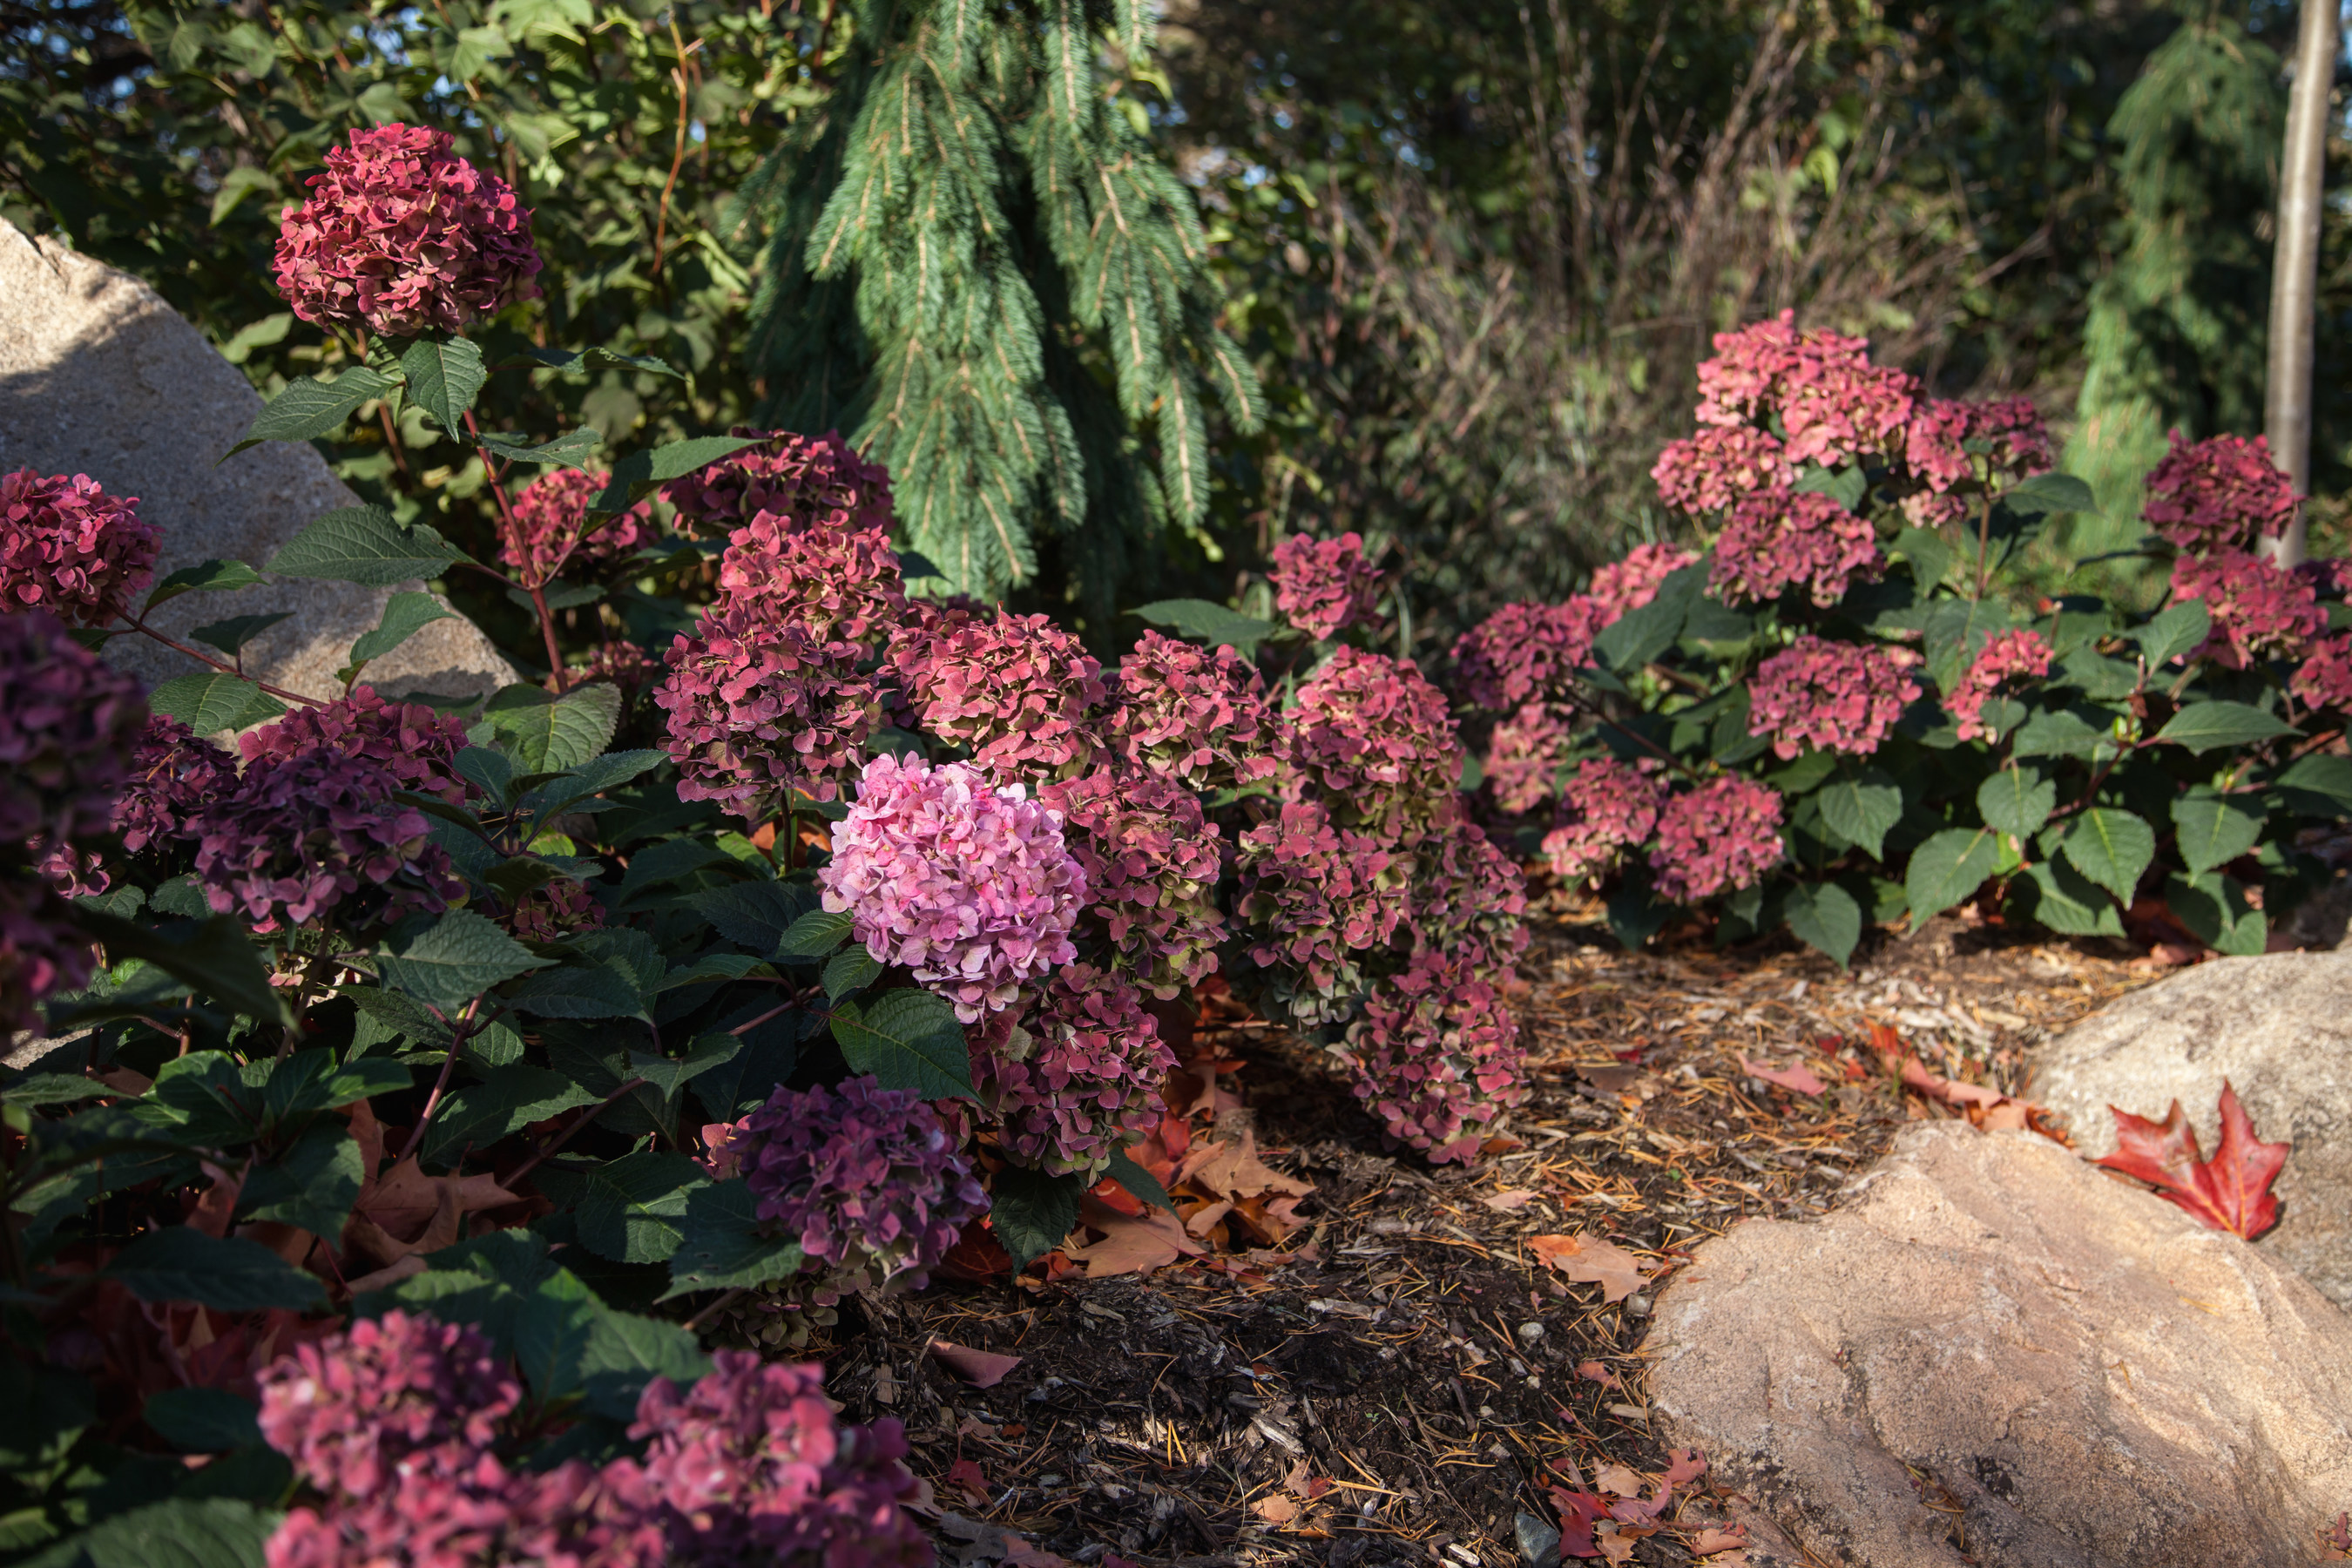 After providing great summer flower color, BloomStruck(R) Hydrangeas' leaves turn a rich, deep red -- the ideal touch for a fall landscape.